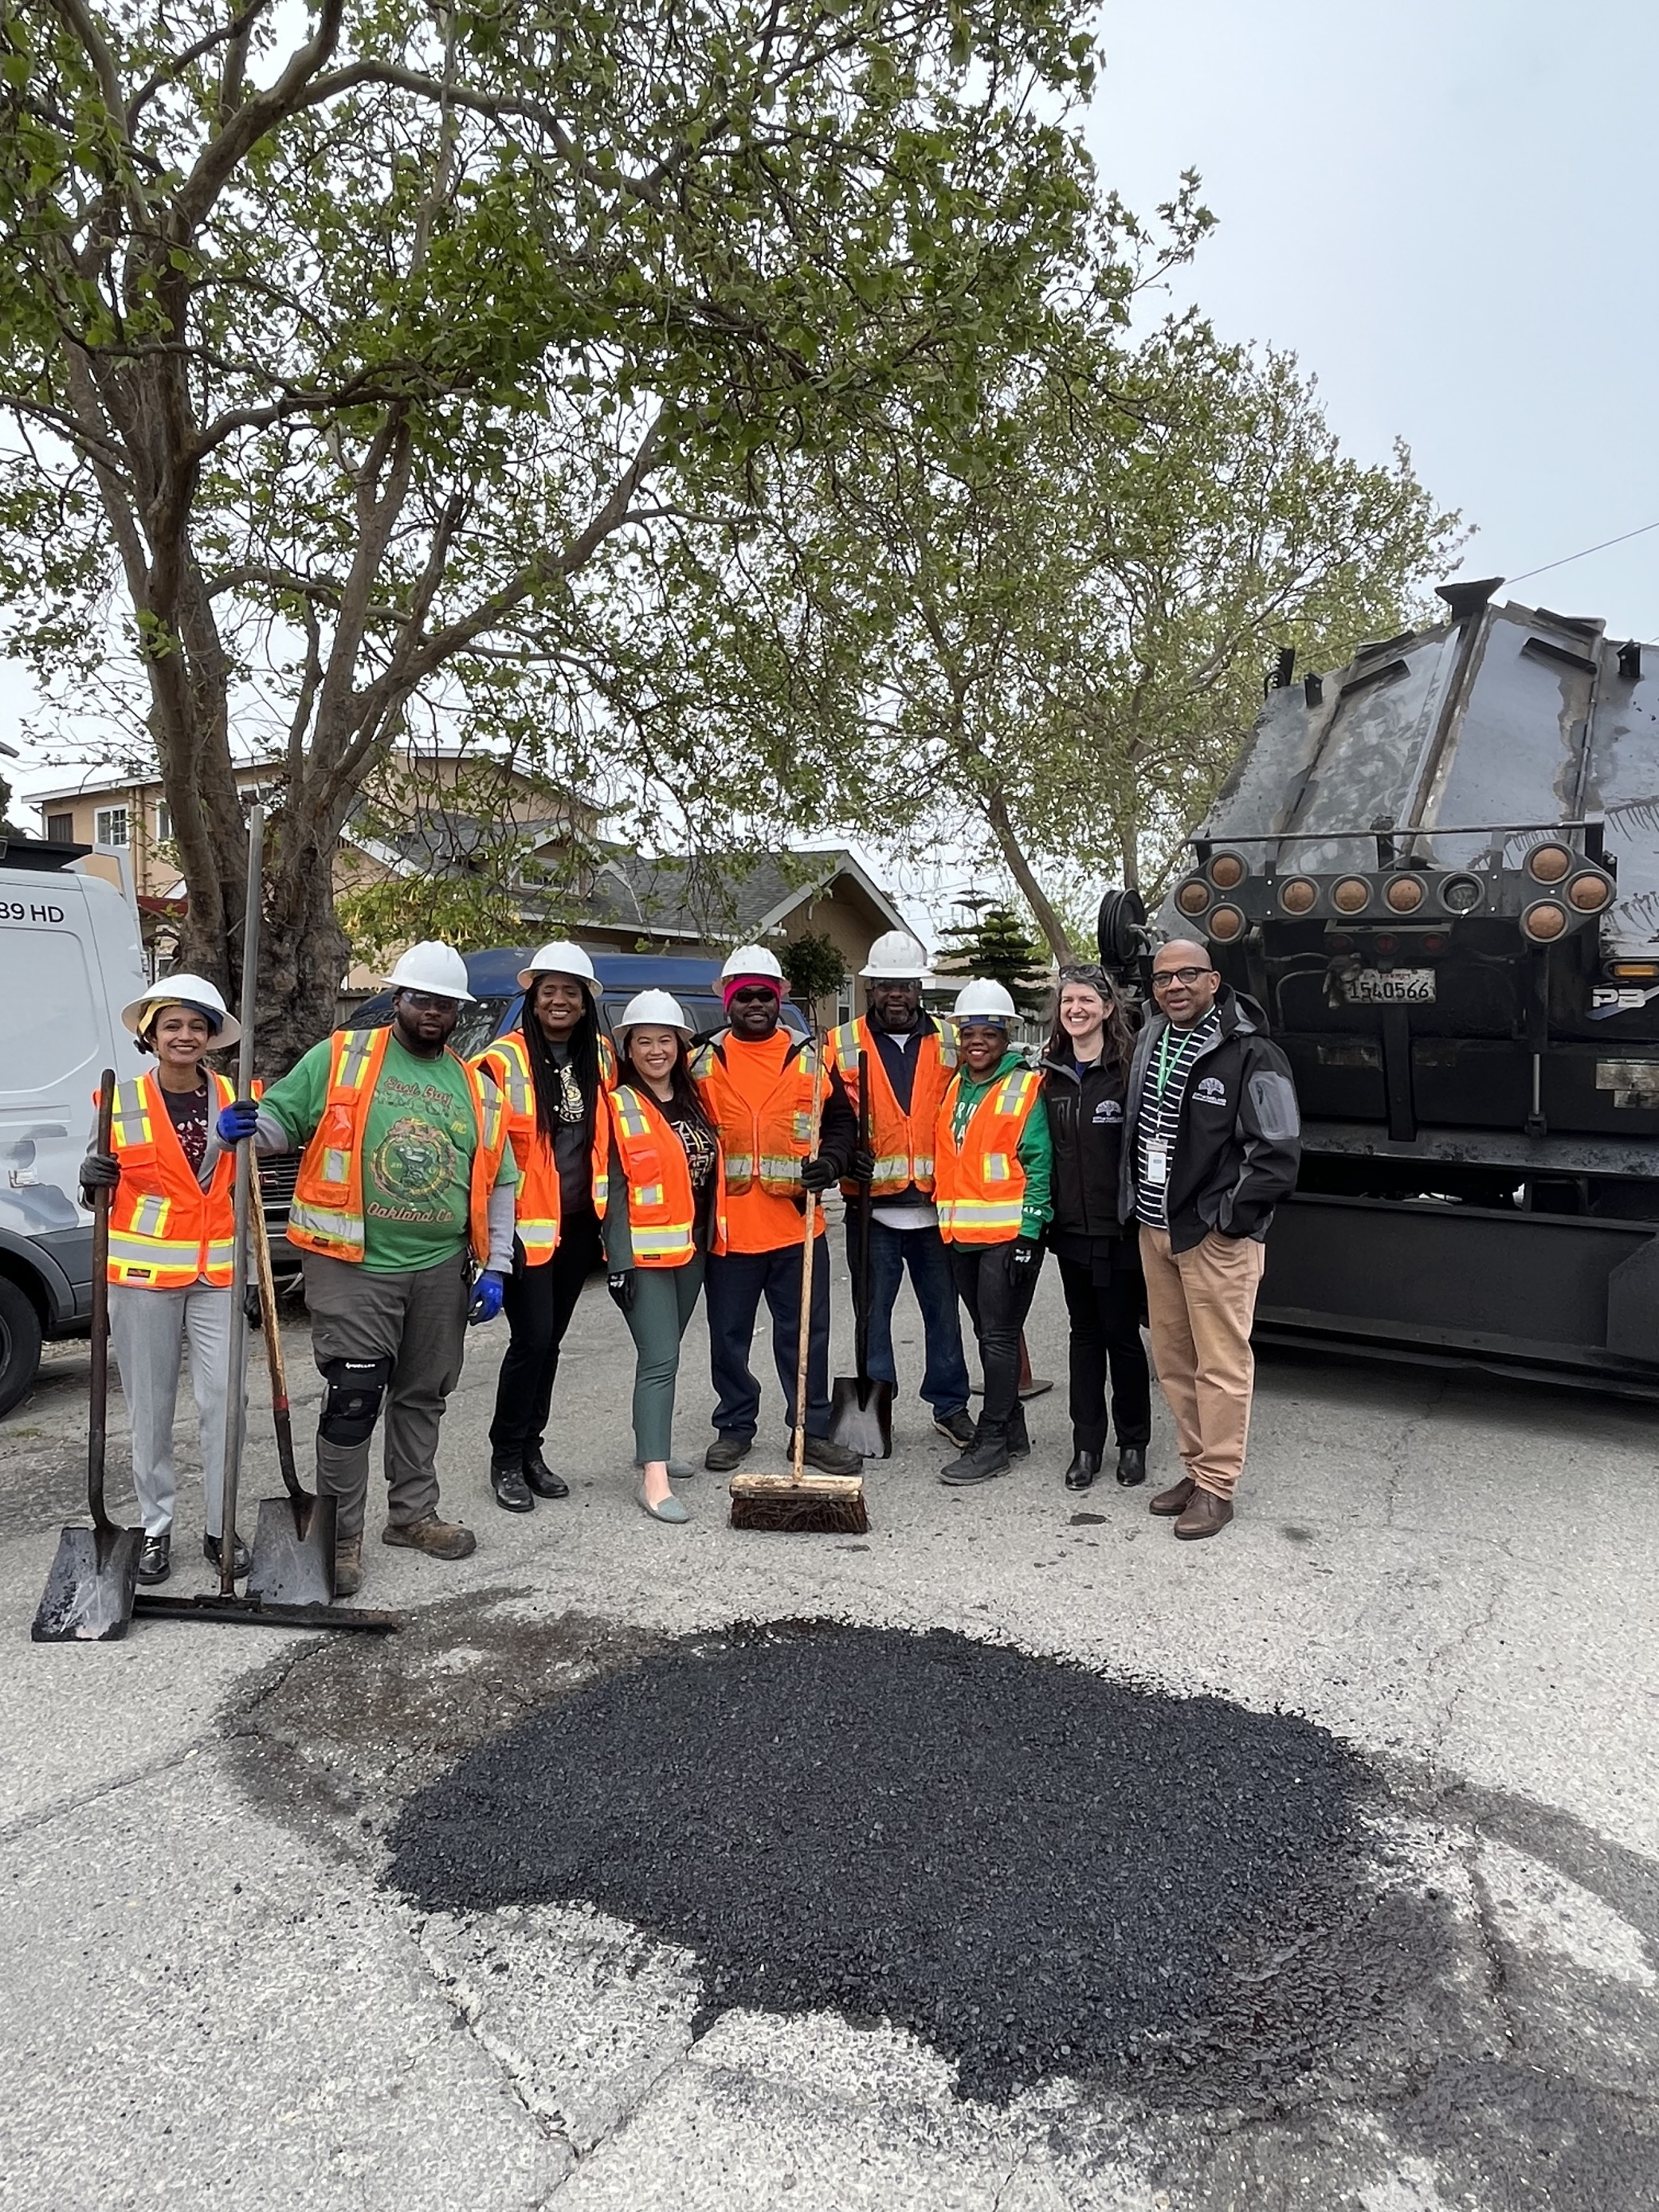 City leaders kick off the One Oakland Spring Clean